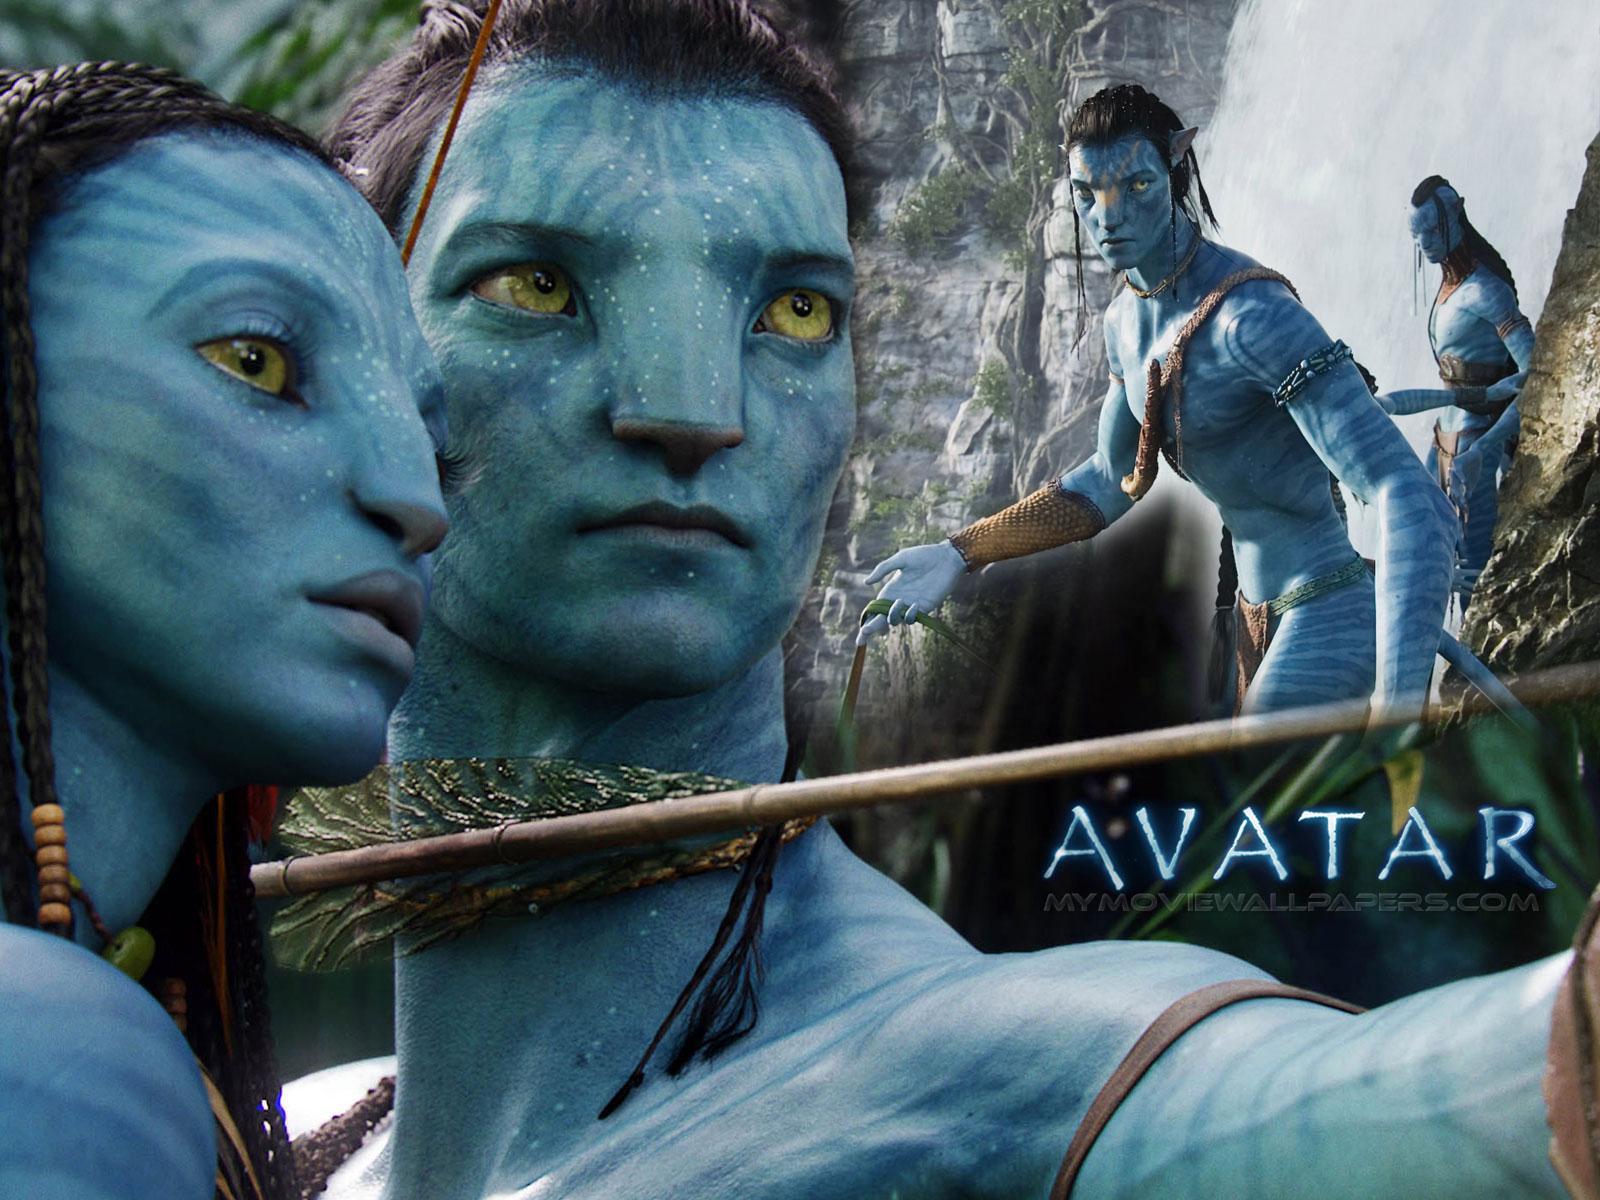 Gallery For gt Avatar Movie Wallpapers